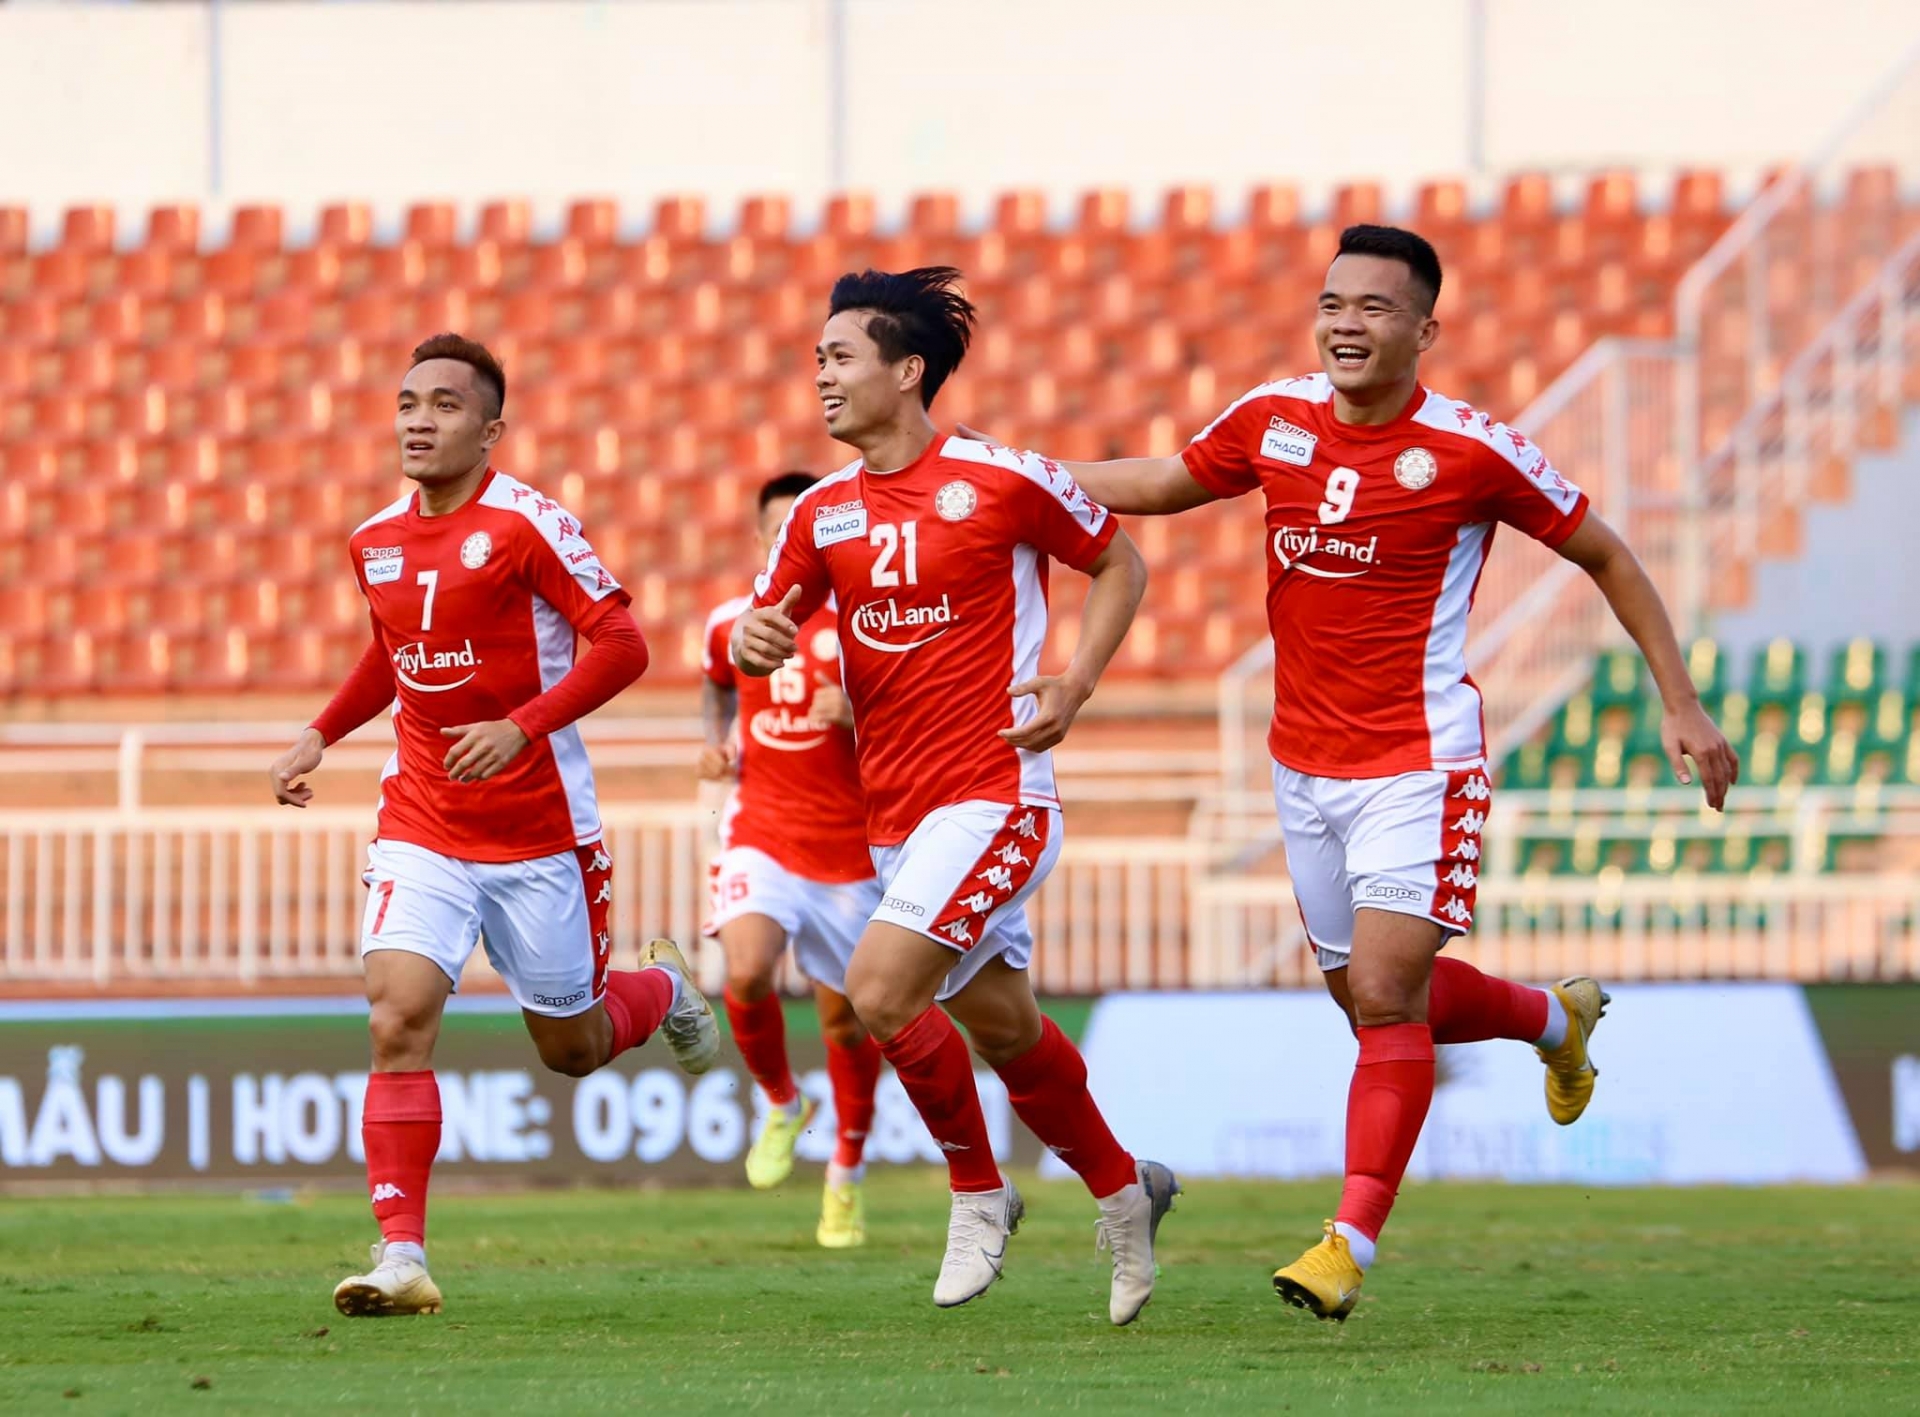 Cong Phuong and Ho Chi Minh City matches at the AFC Cup have been delayed.